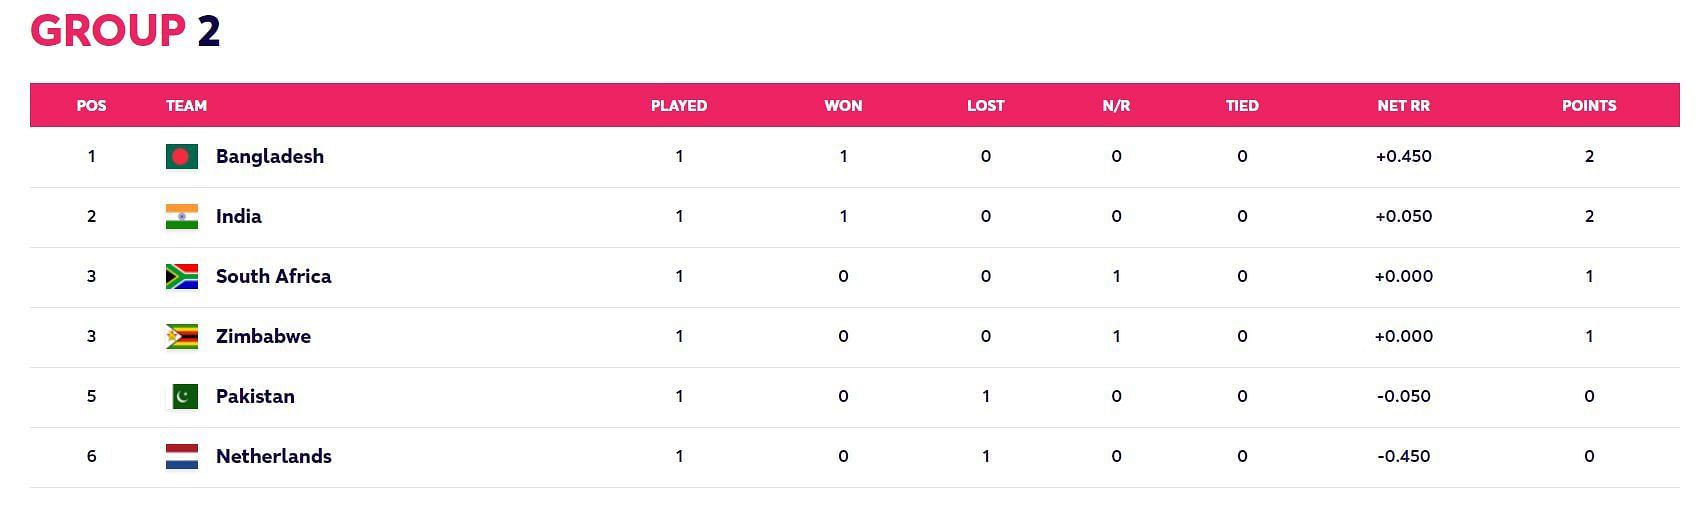 Updated Points Table after Match 18 (Image Courtesy: www.t20worldcup.com)